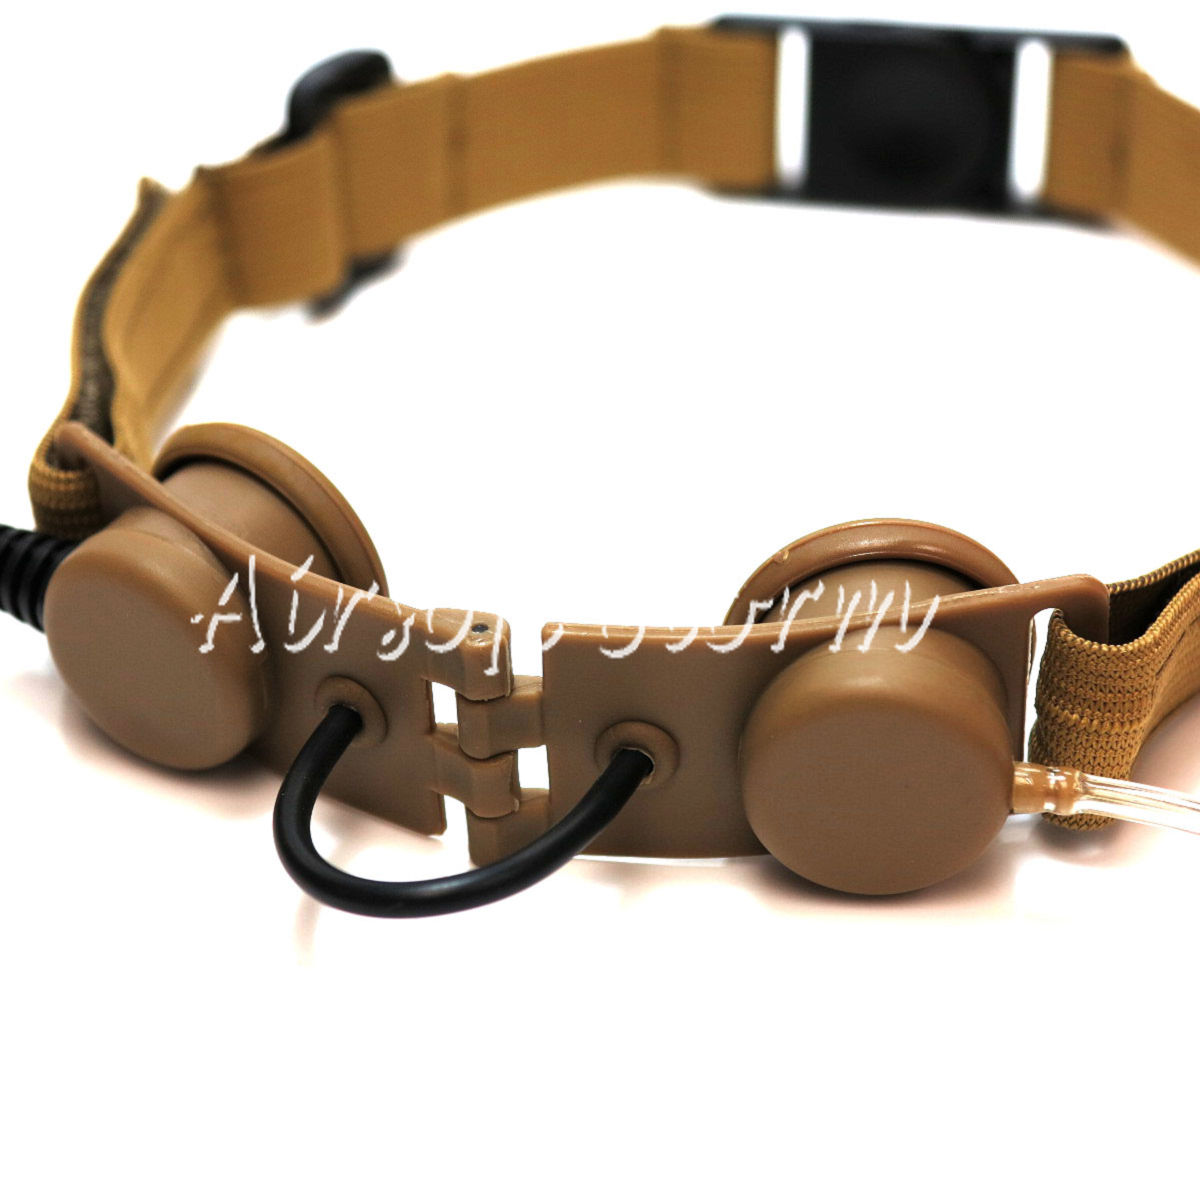 Airsoft Gear SWAT Z Tactical Throat Mic Headset Desert Tan - Click Image to Close